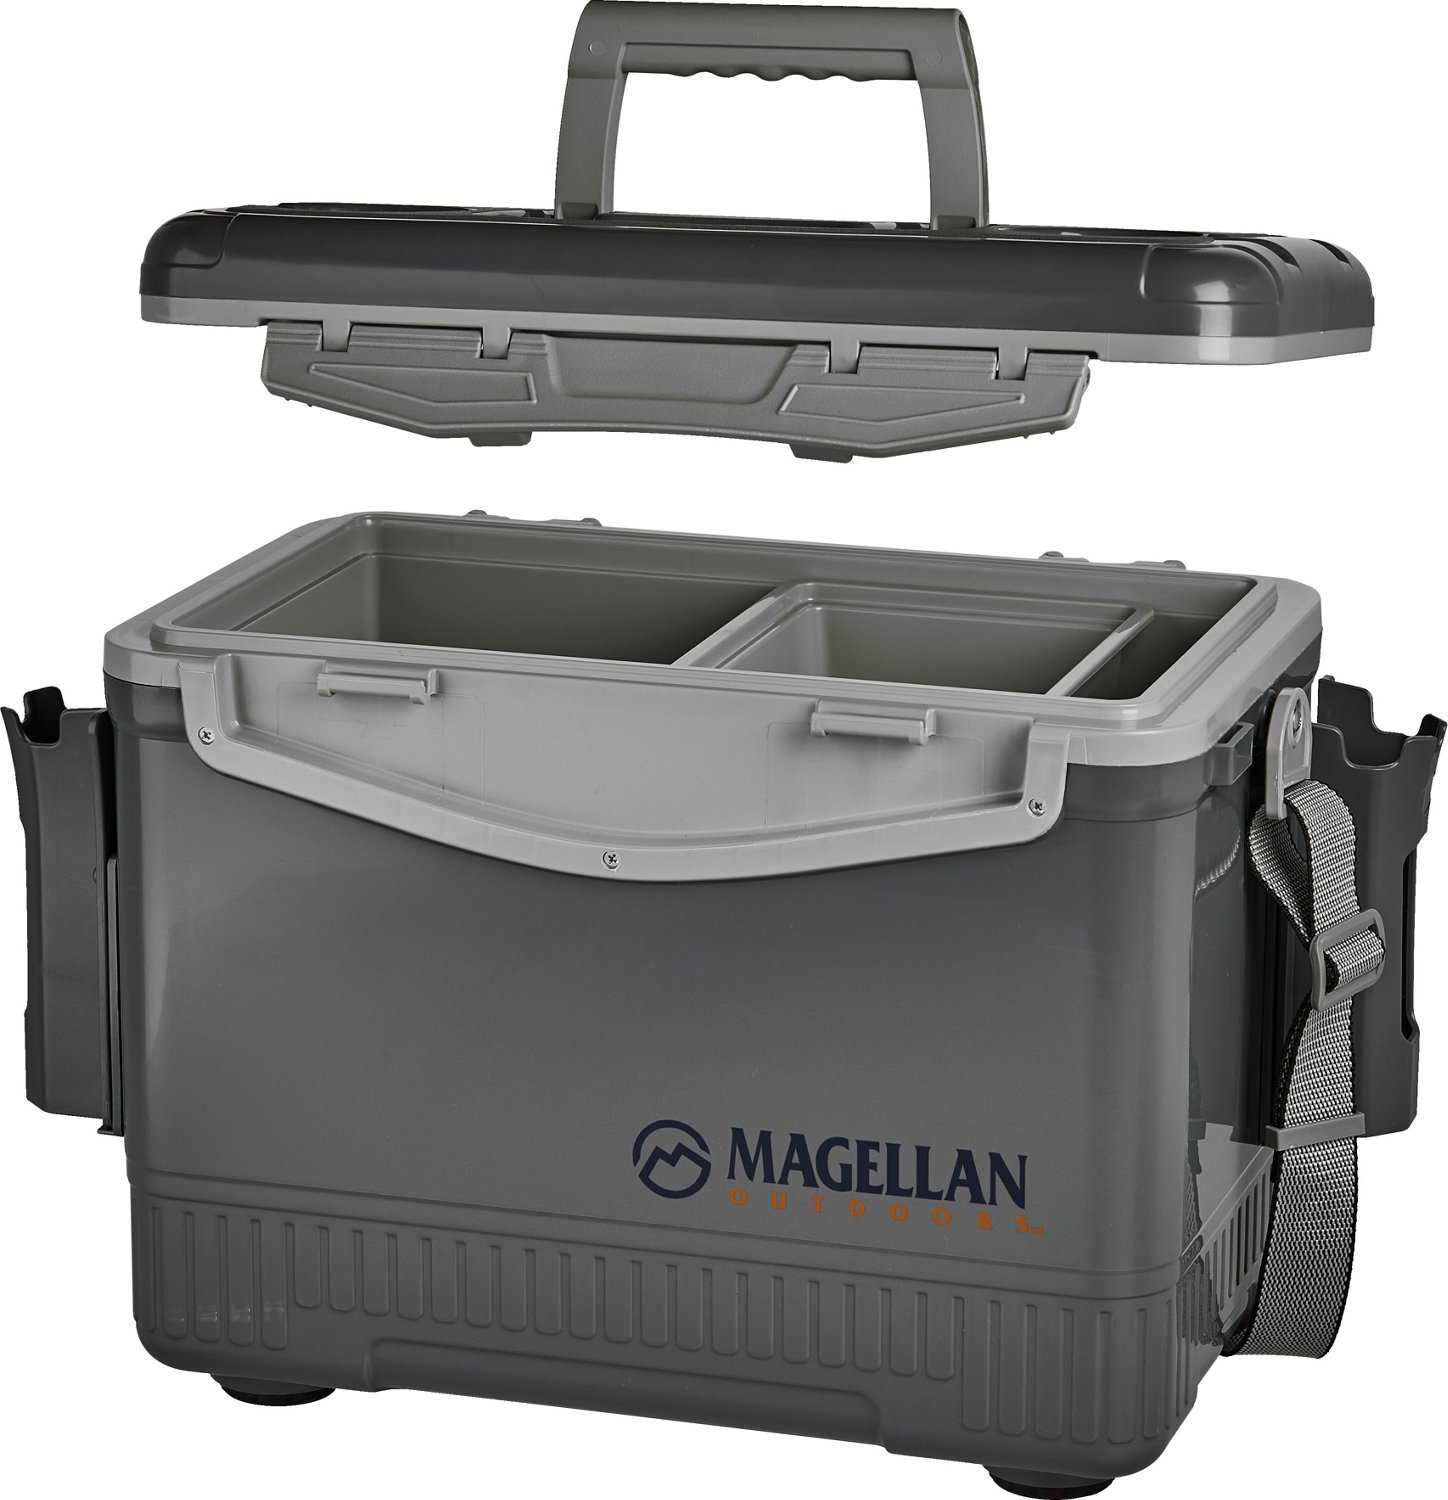 Magellan 19 quart insulated Bait/ Dry Box for $22.50! Includes